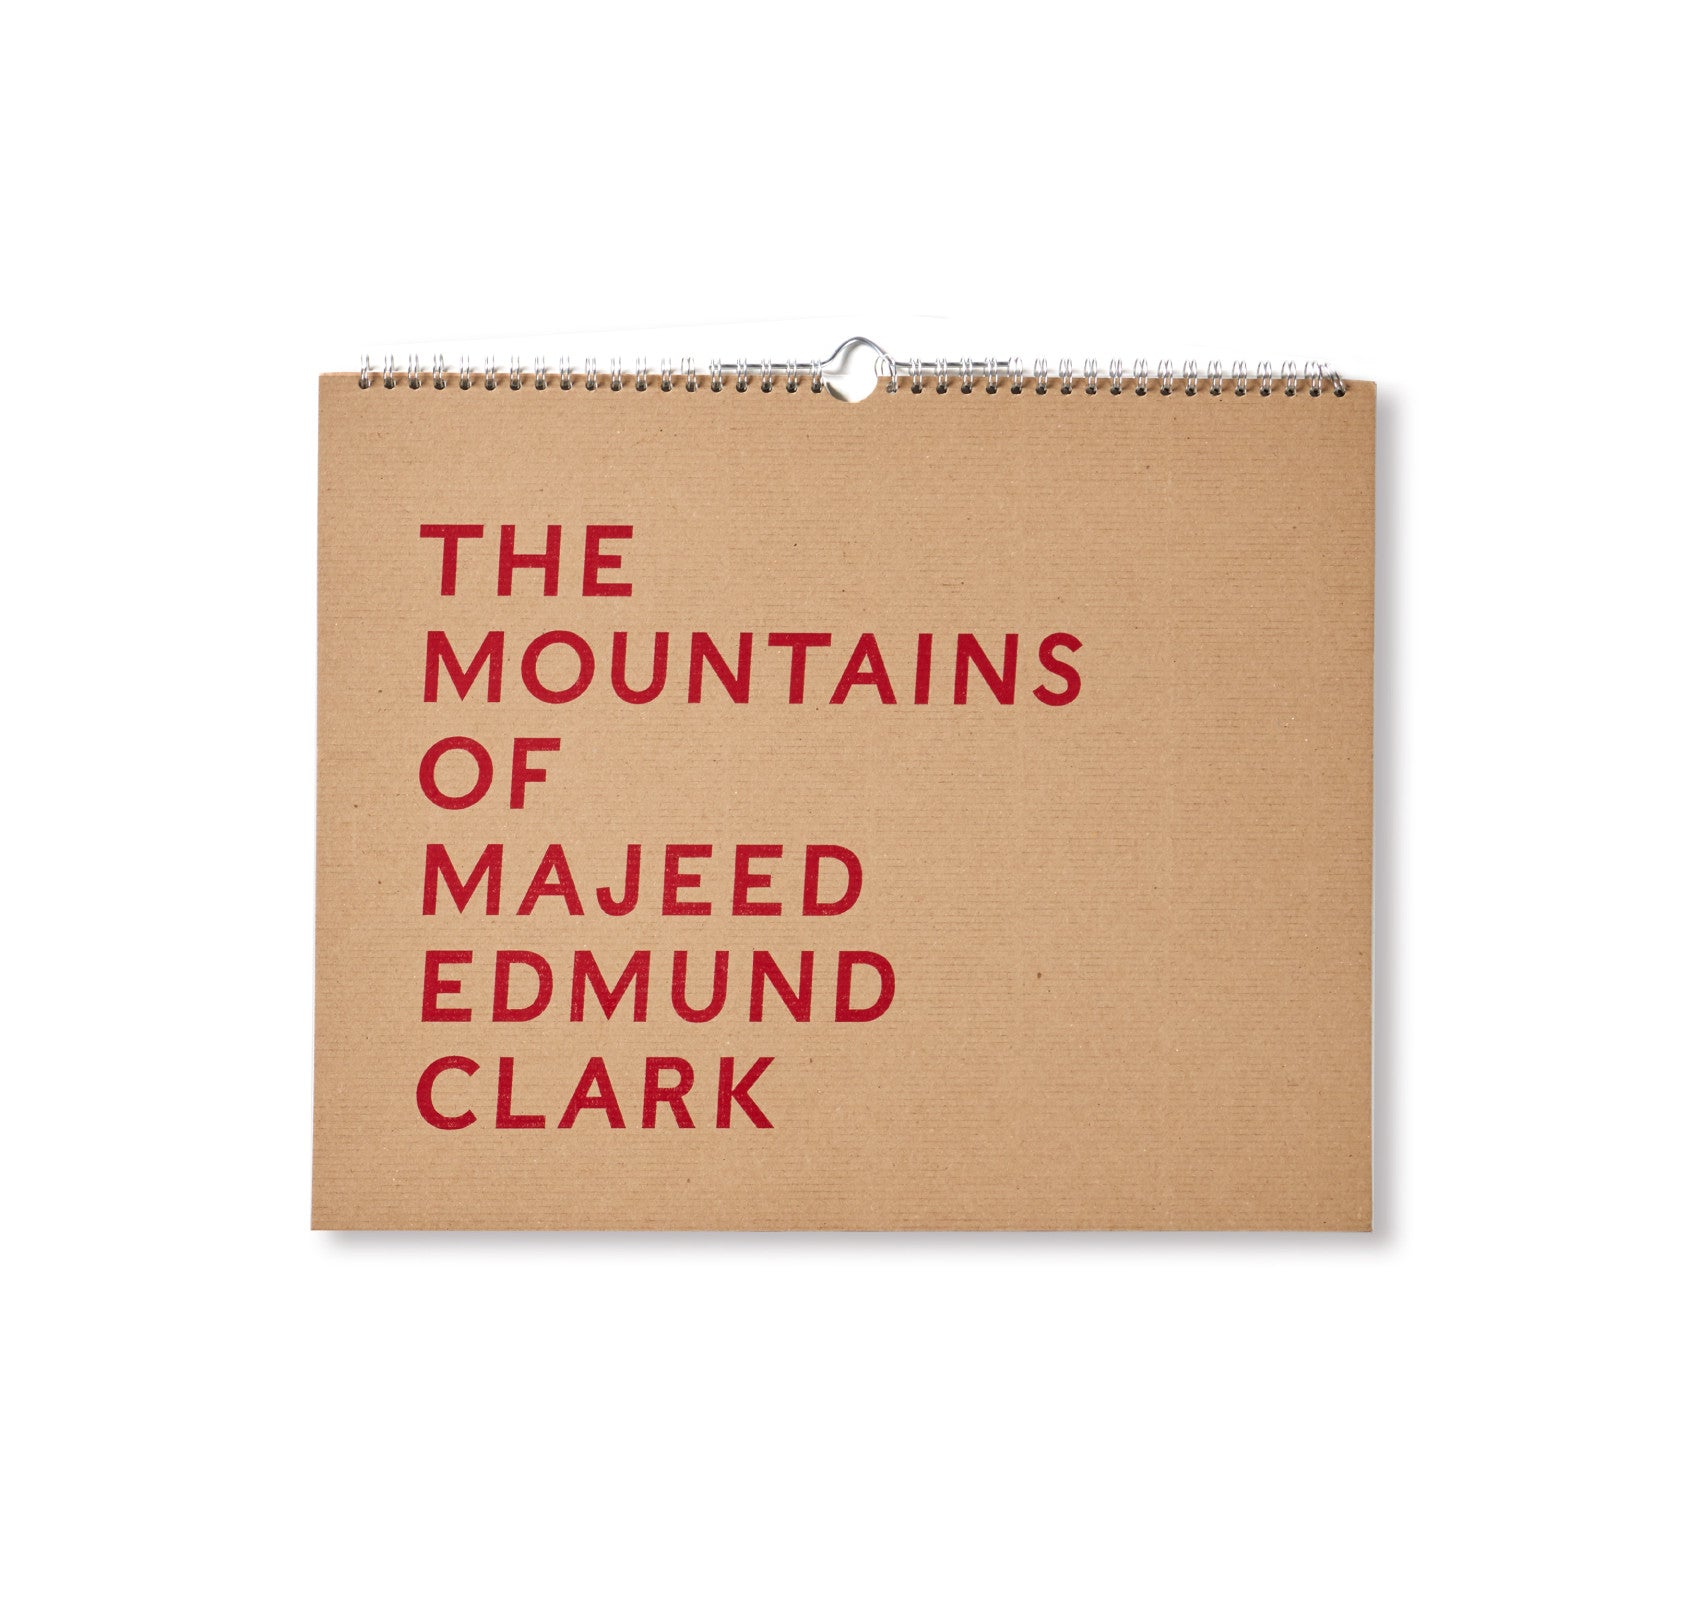 THE MOUNTAINS OF MAJEED by Edmund Clark